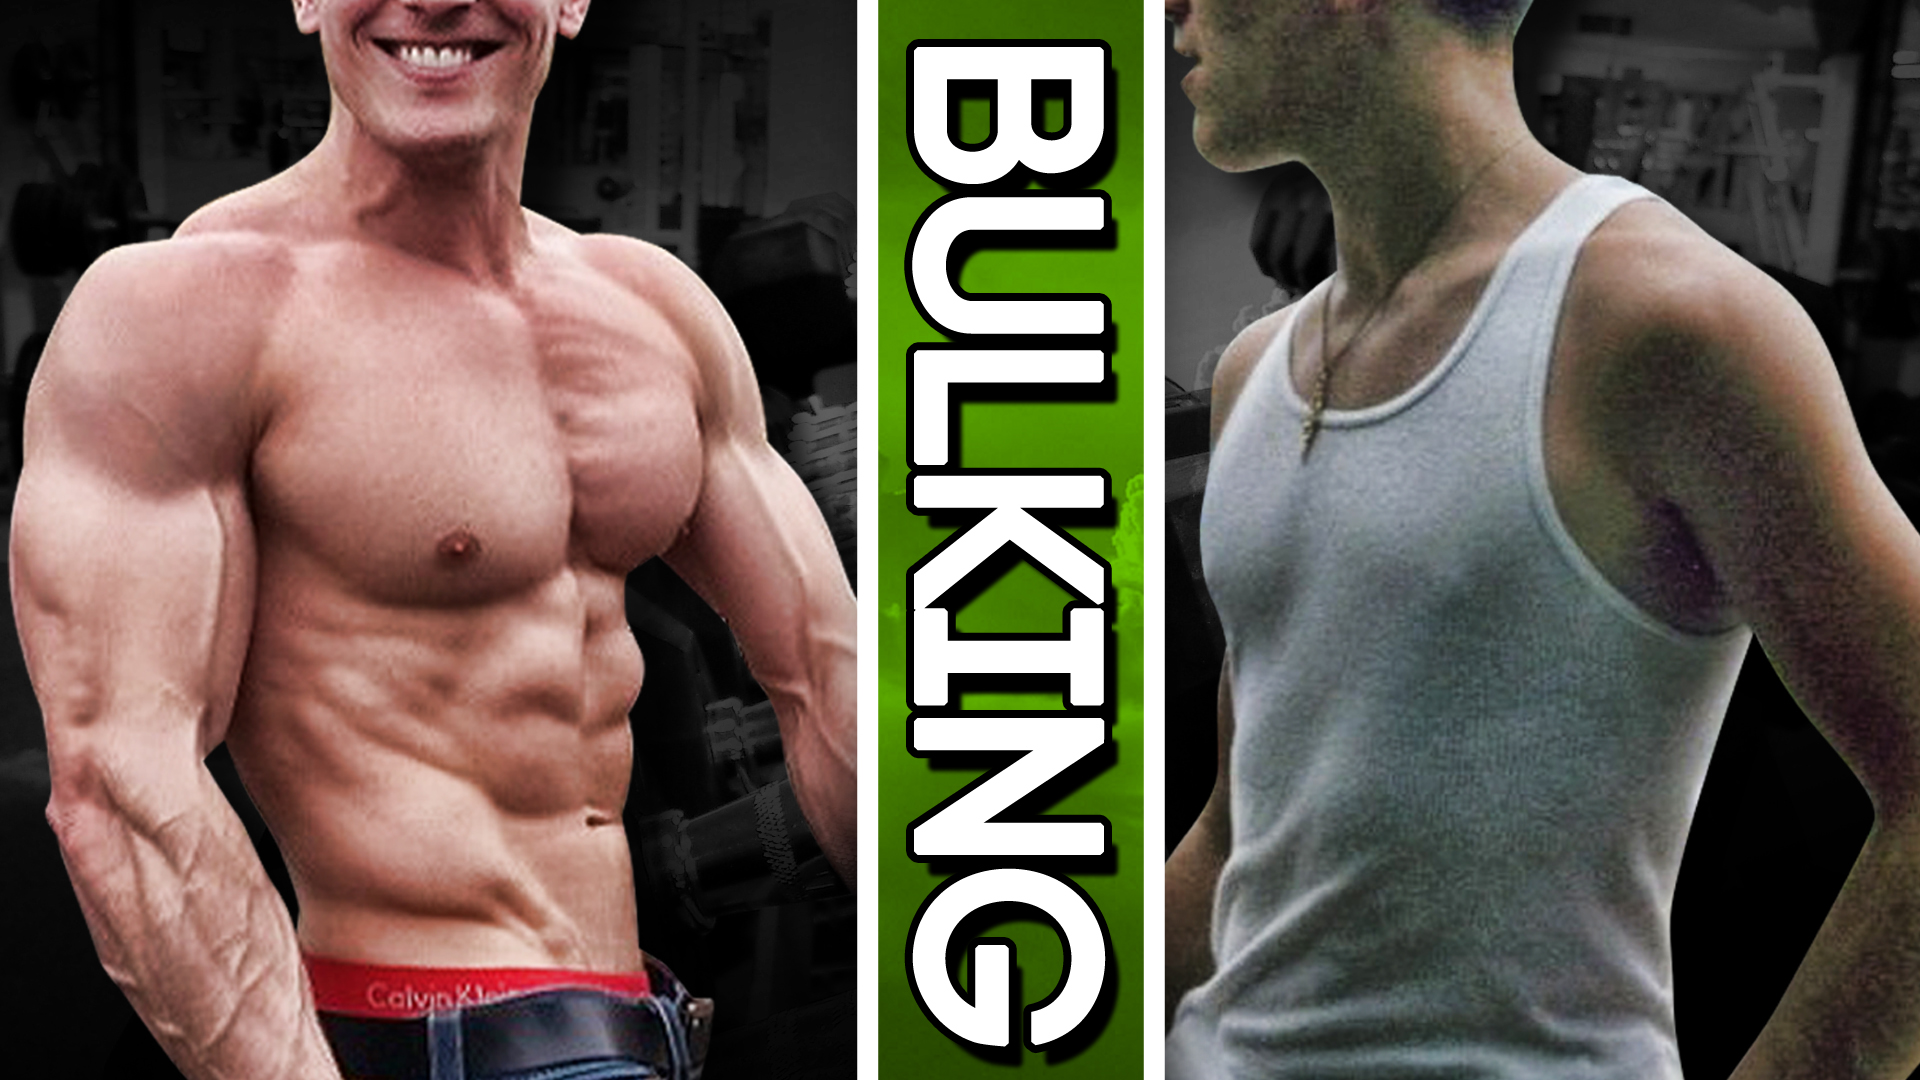 Bulking - You Are Doing It Wrong!